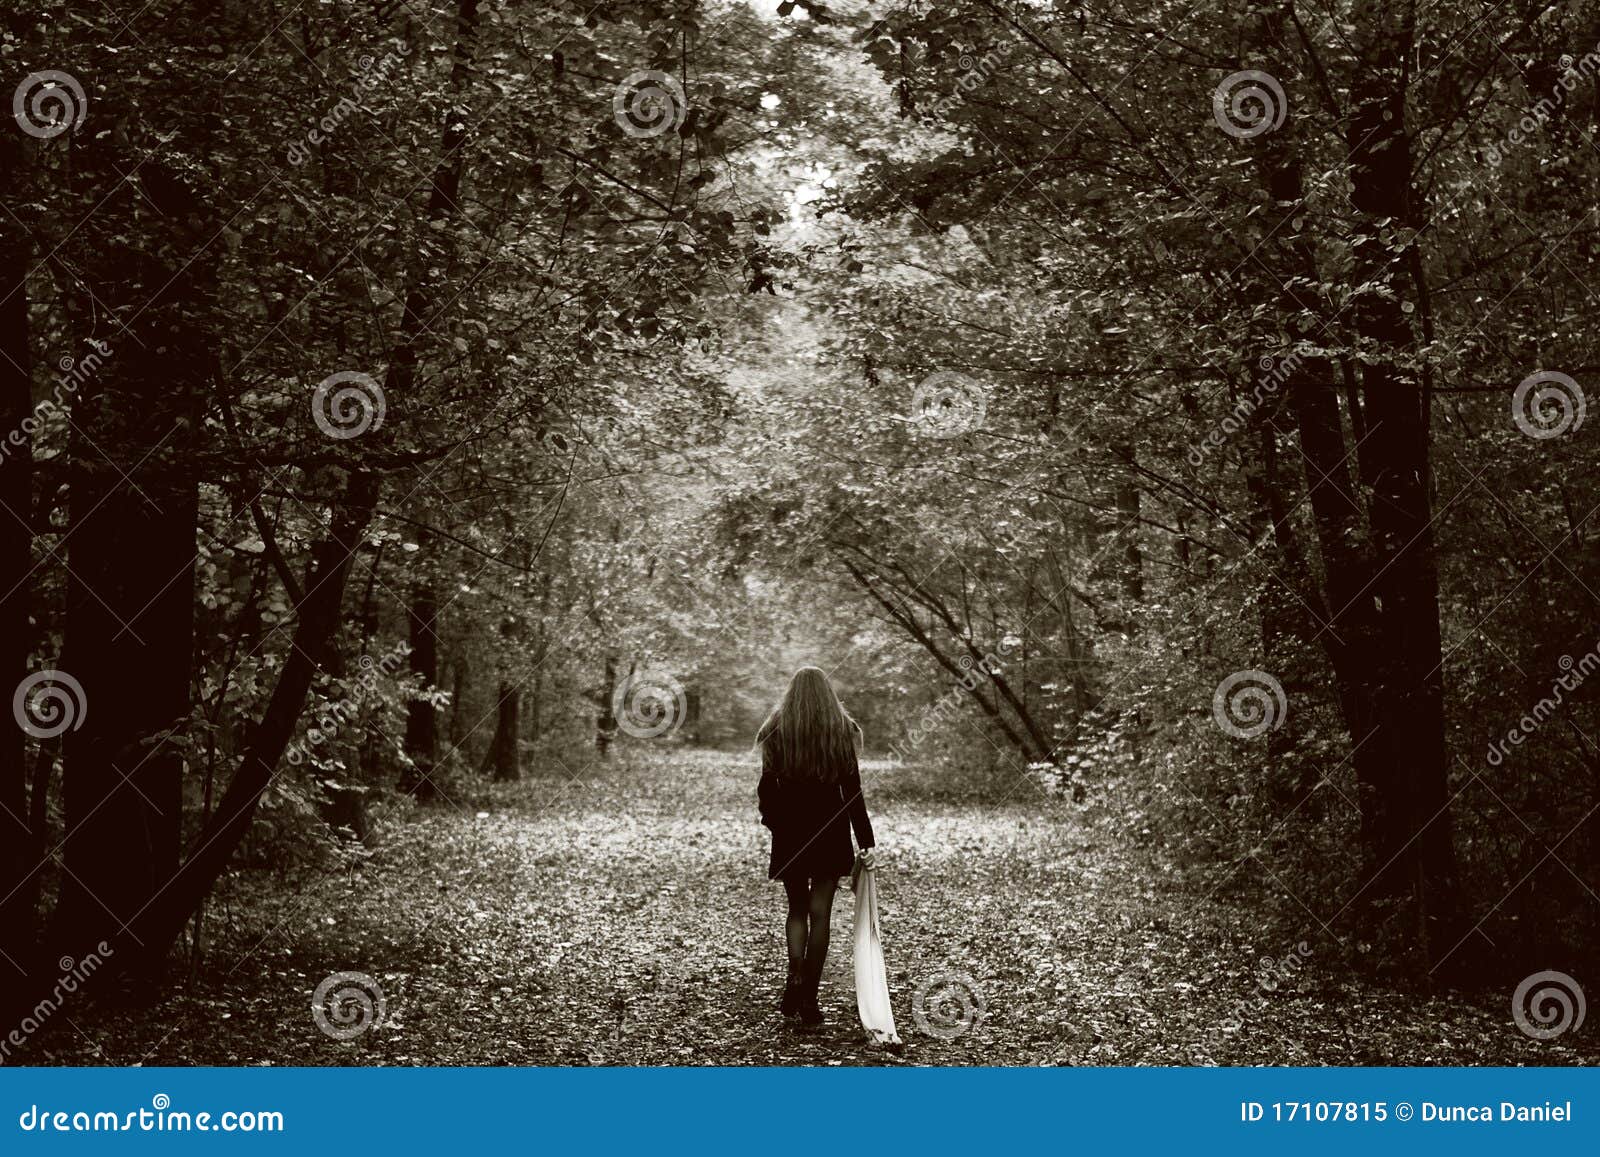 lonely sad woman on the wood road